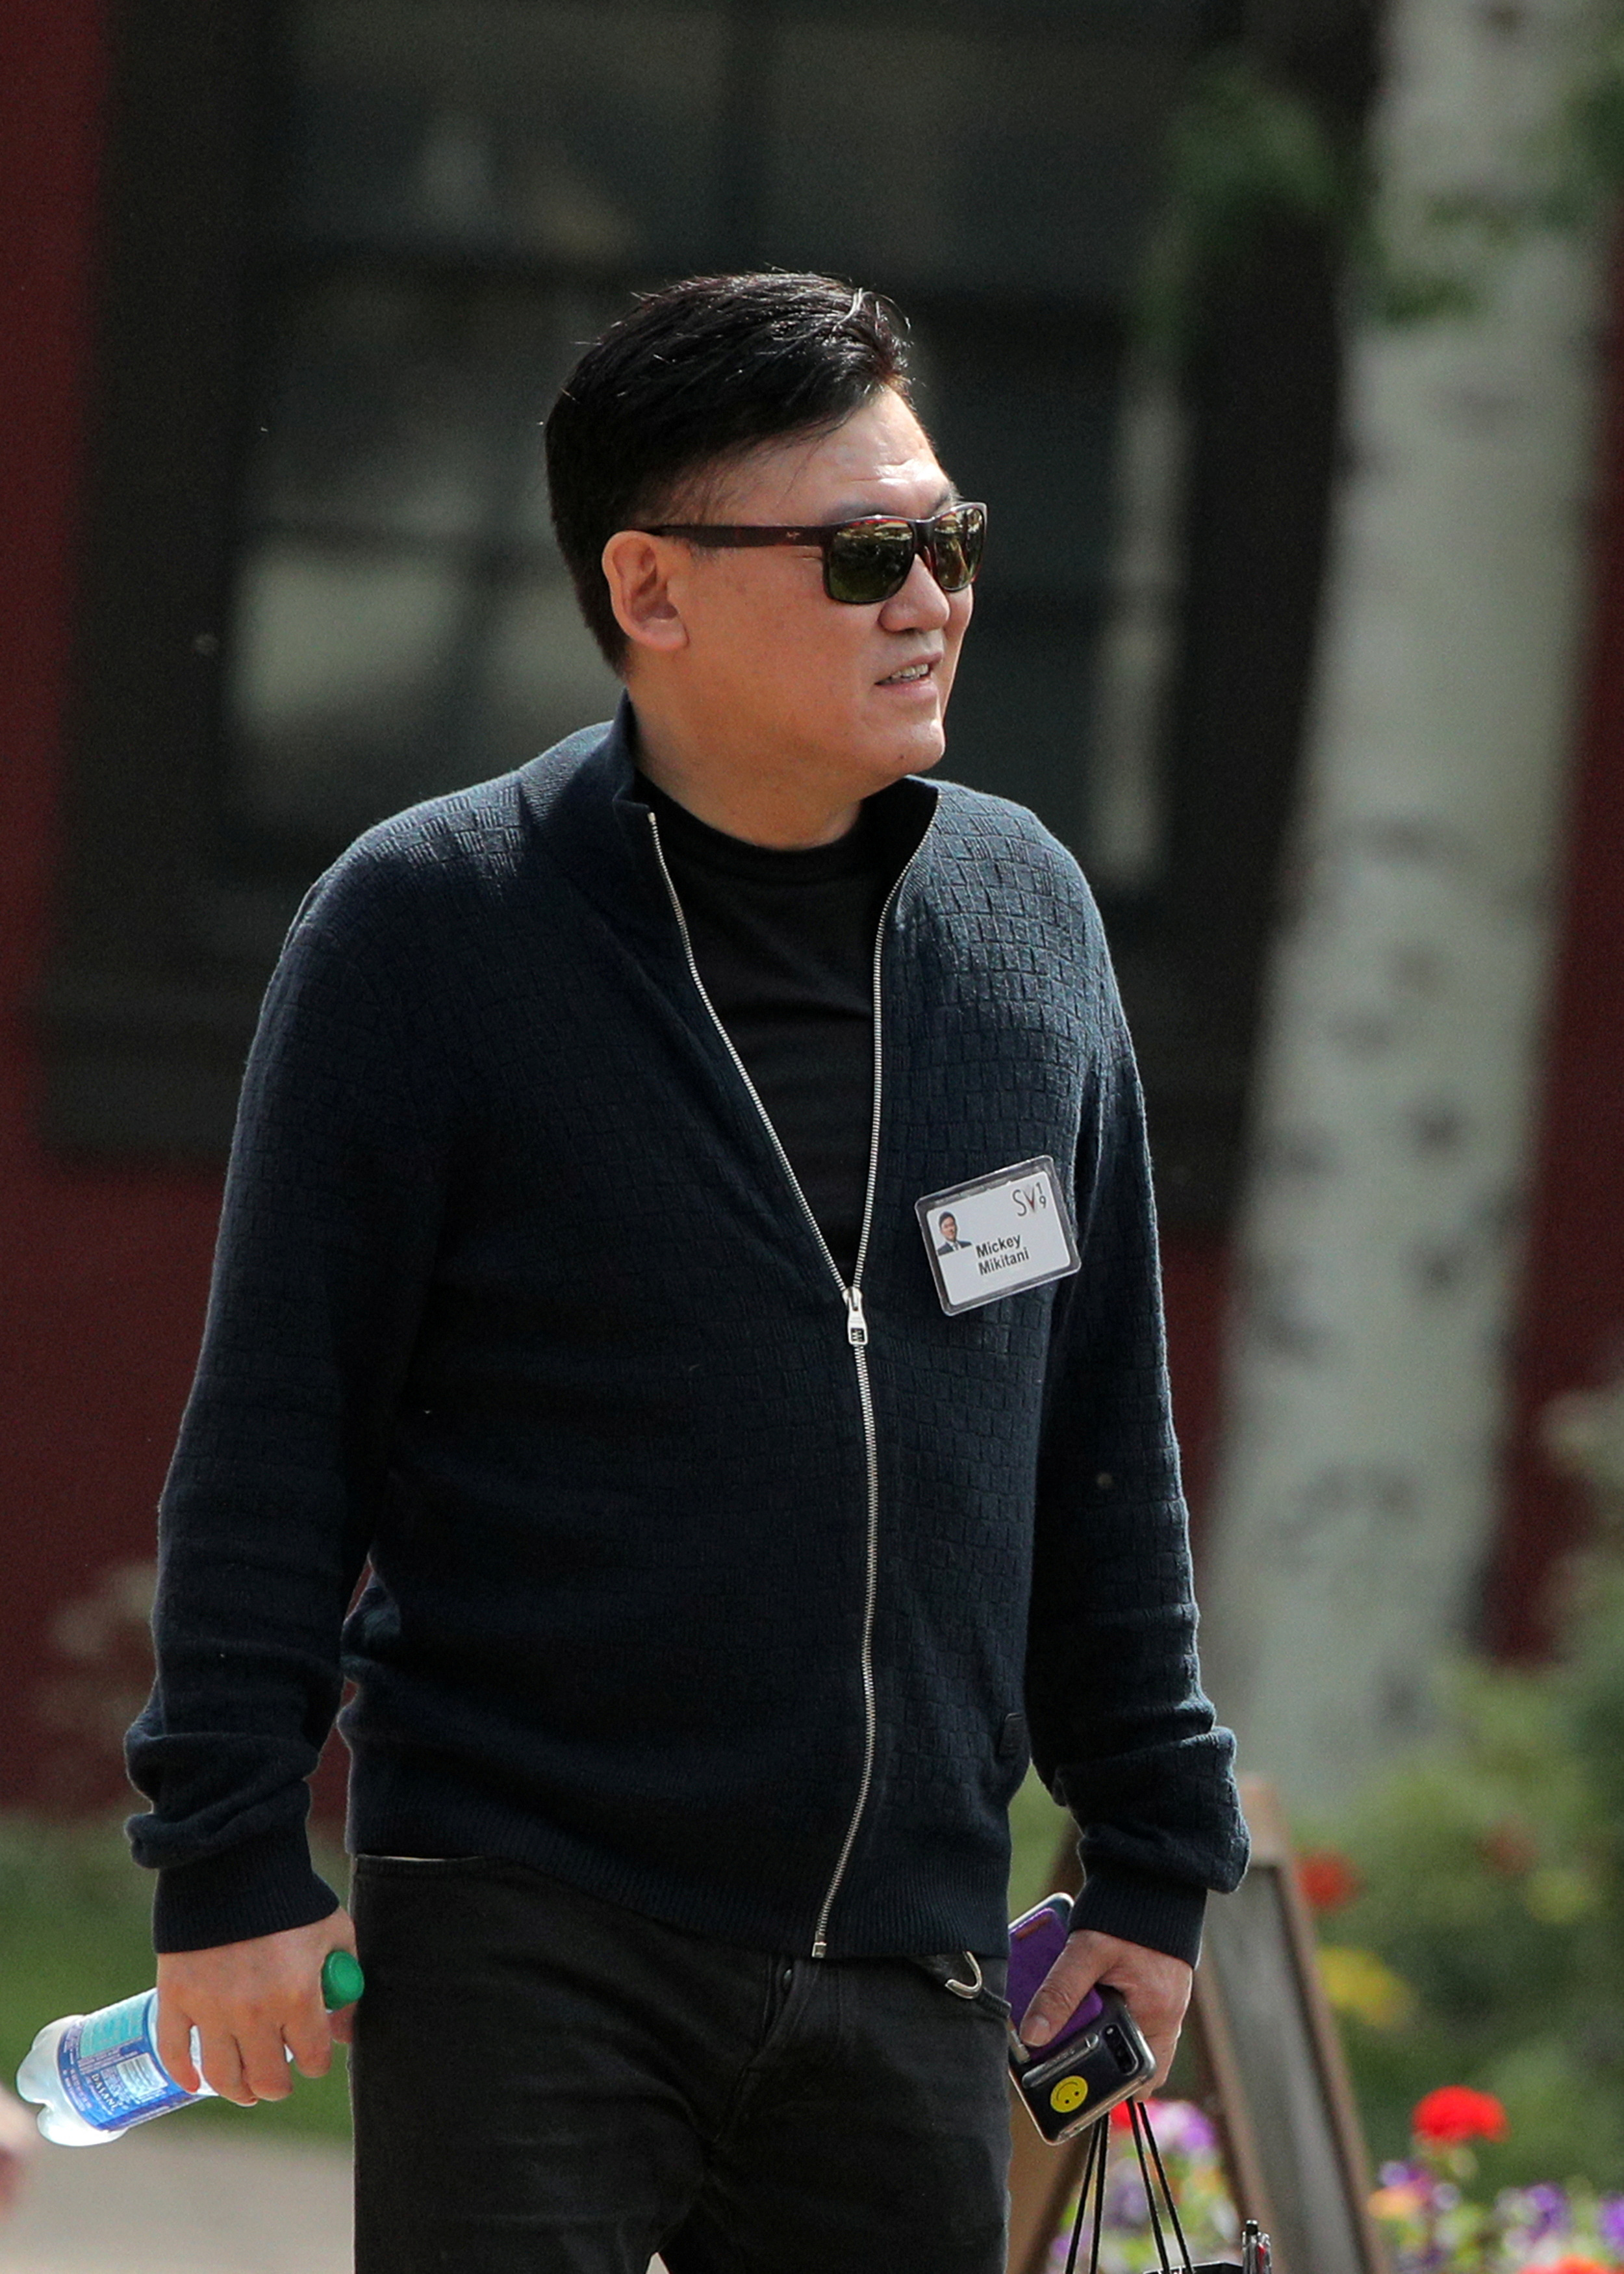 Hiroshi Mikitani, CEO of Rakuten, attends the annual Allen and Co. Sun Valley media conference in Sun Valley, Idaho